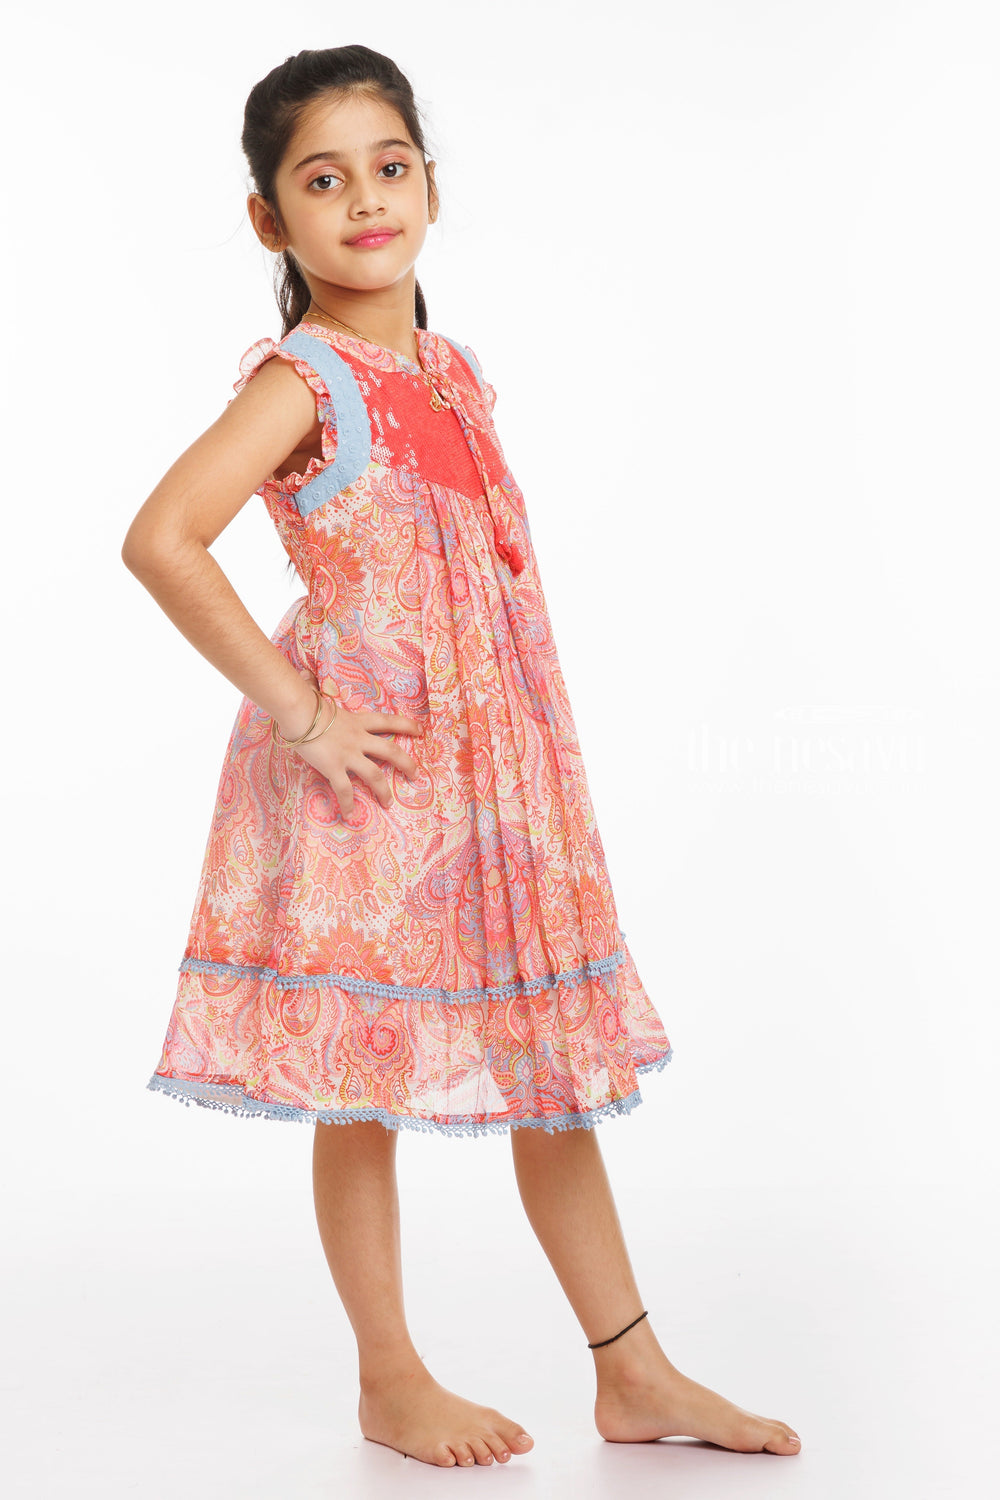 The Nesavu Girls Fancy Frock Radiant Paisley Parade: Colorful Cotton Frock for Trendy Tots Nesavu Shop the Latest Girls Paisley Cotton Frocks | Perfect for Any Occasion | The Nesavu